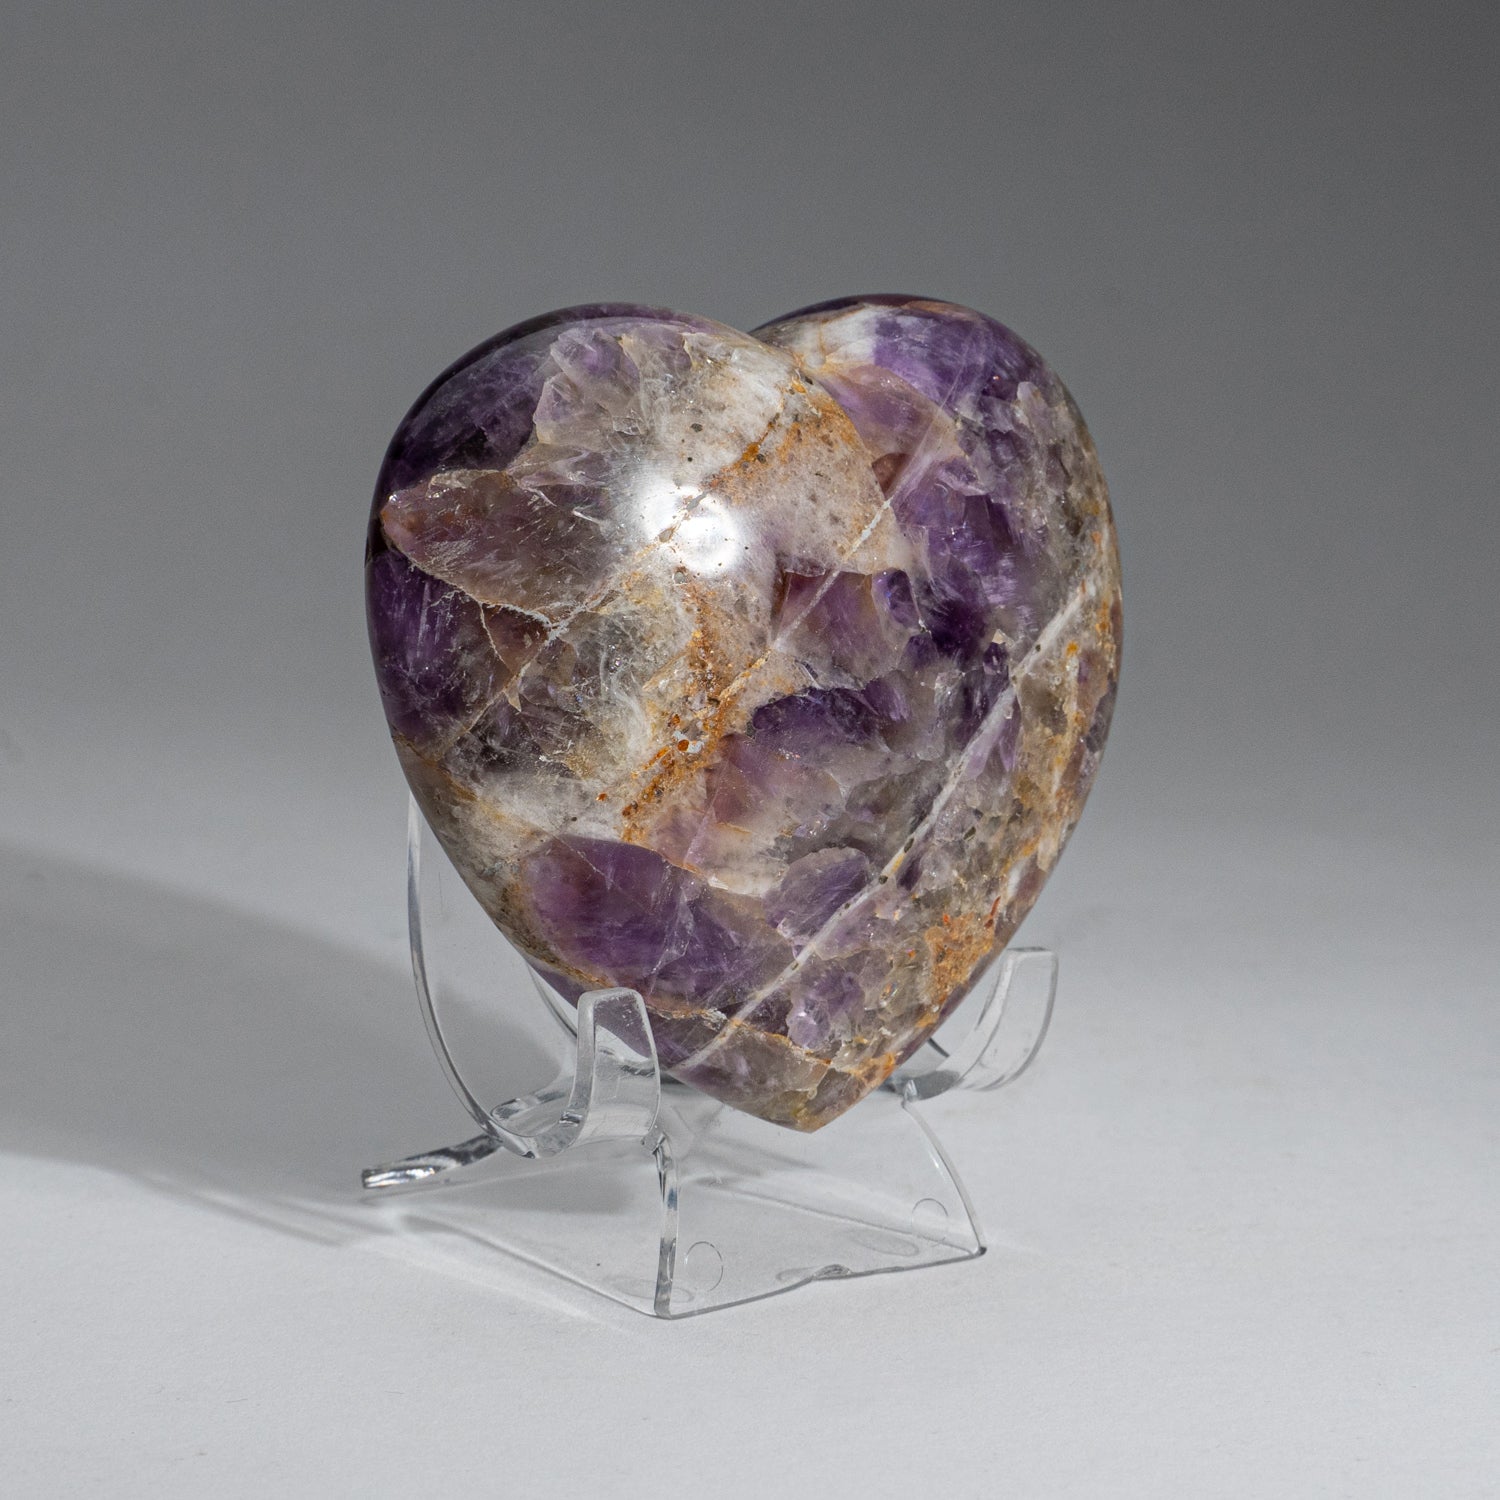 Polished Chevron Amethyst Small Heart from Brazil (335 grams)